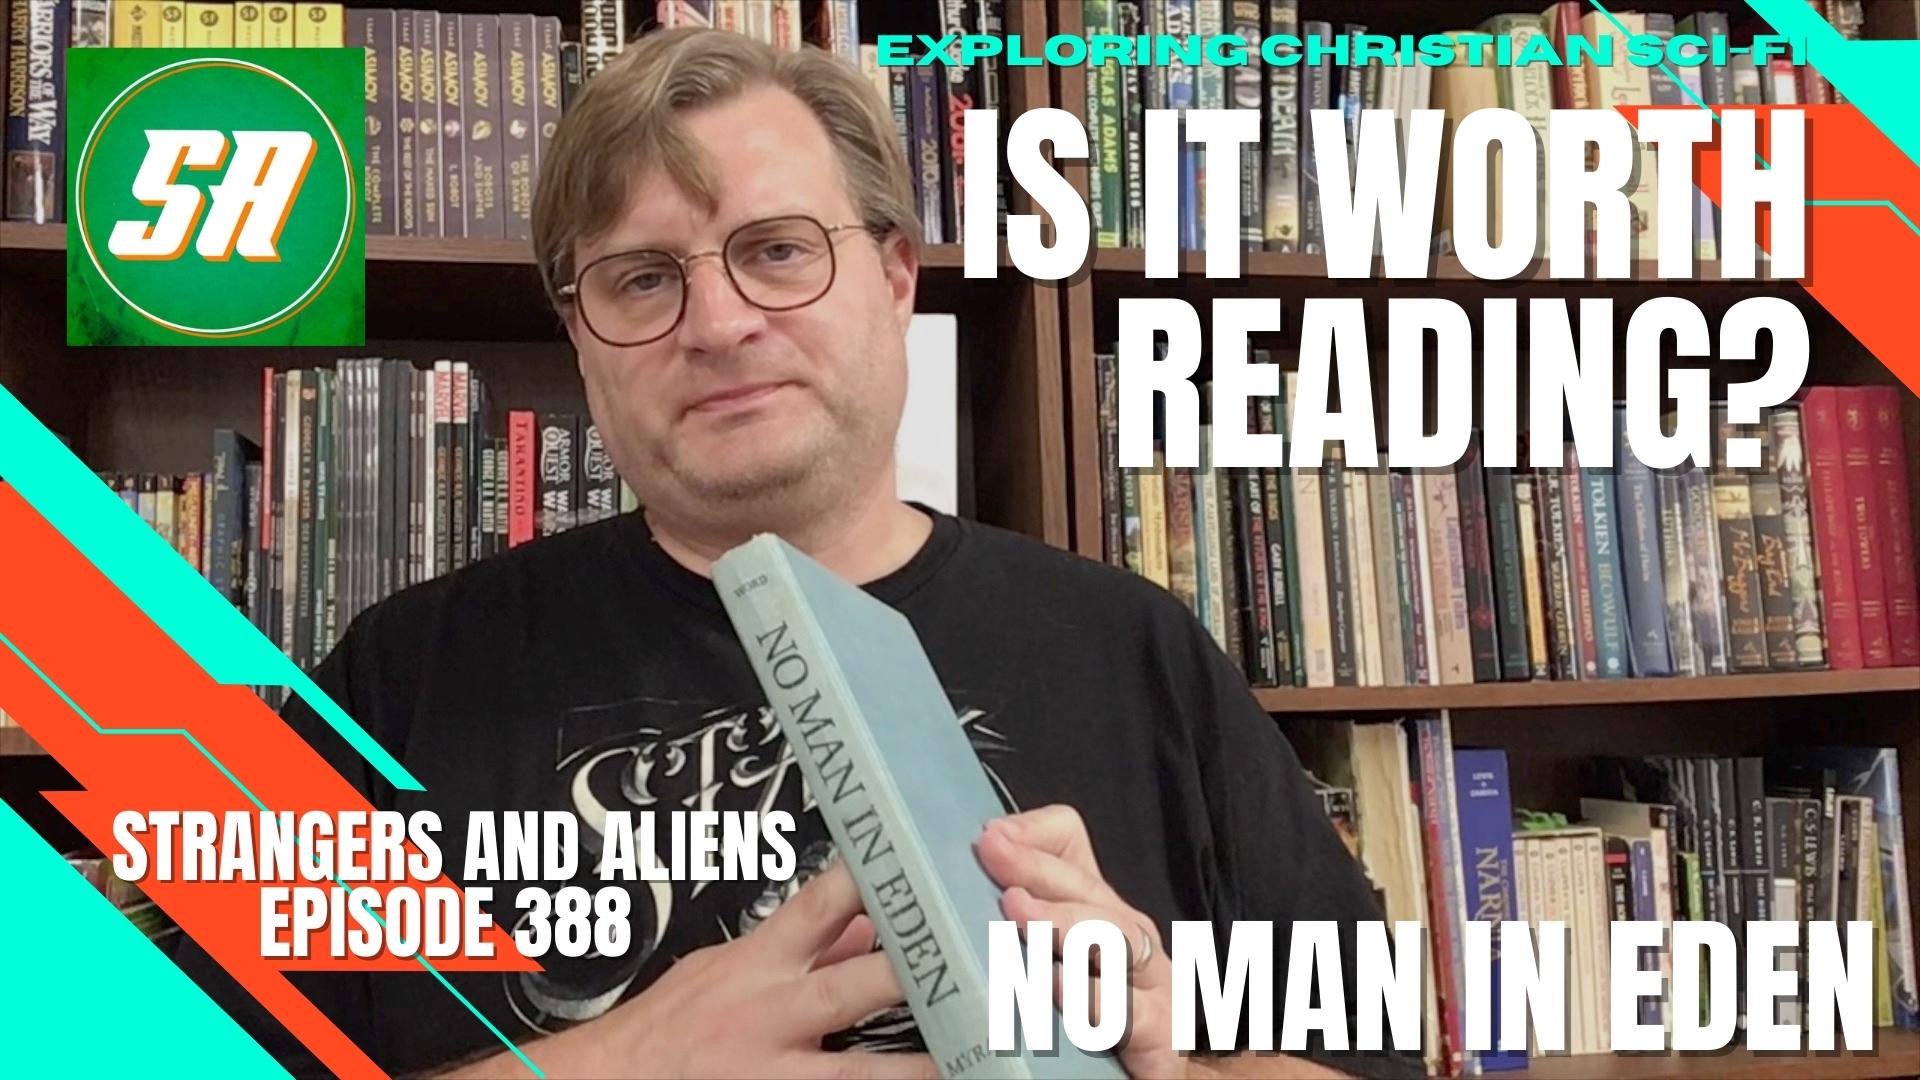 NO MAN IN EDEN by H.L. Myra: Is It Worth Reading? (Exploring Christian Sci-Fi) – SA388